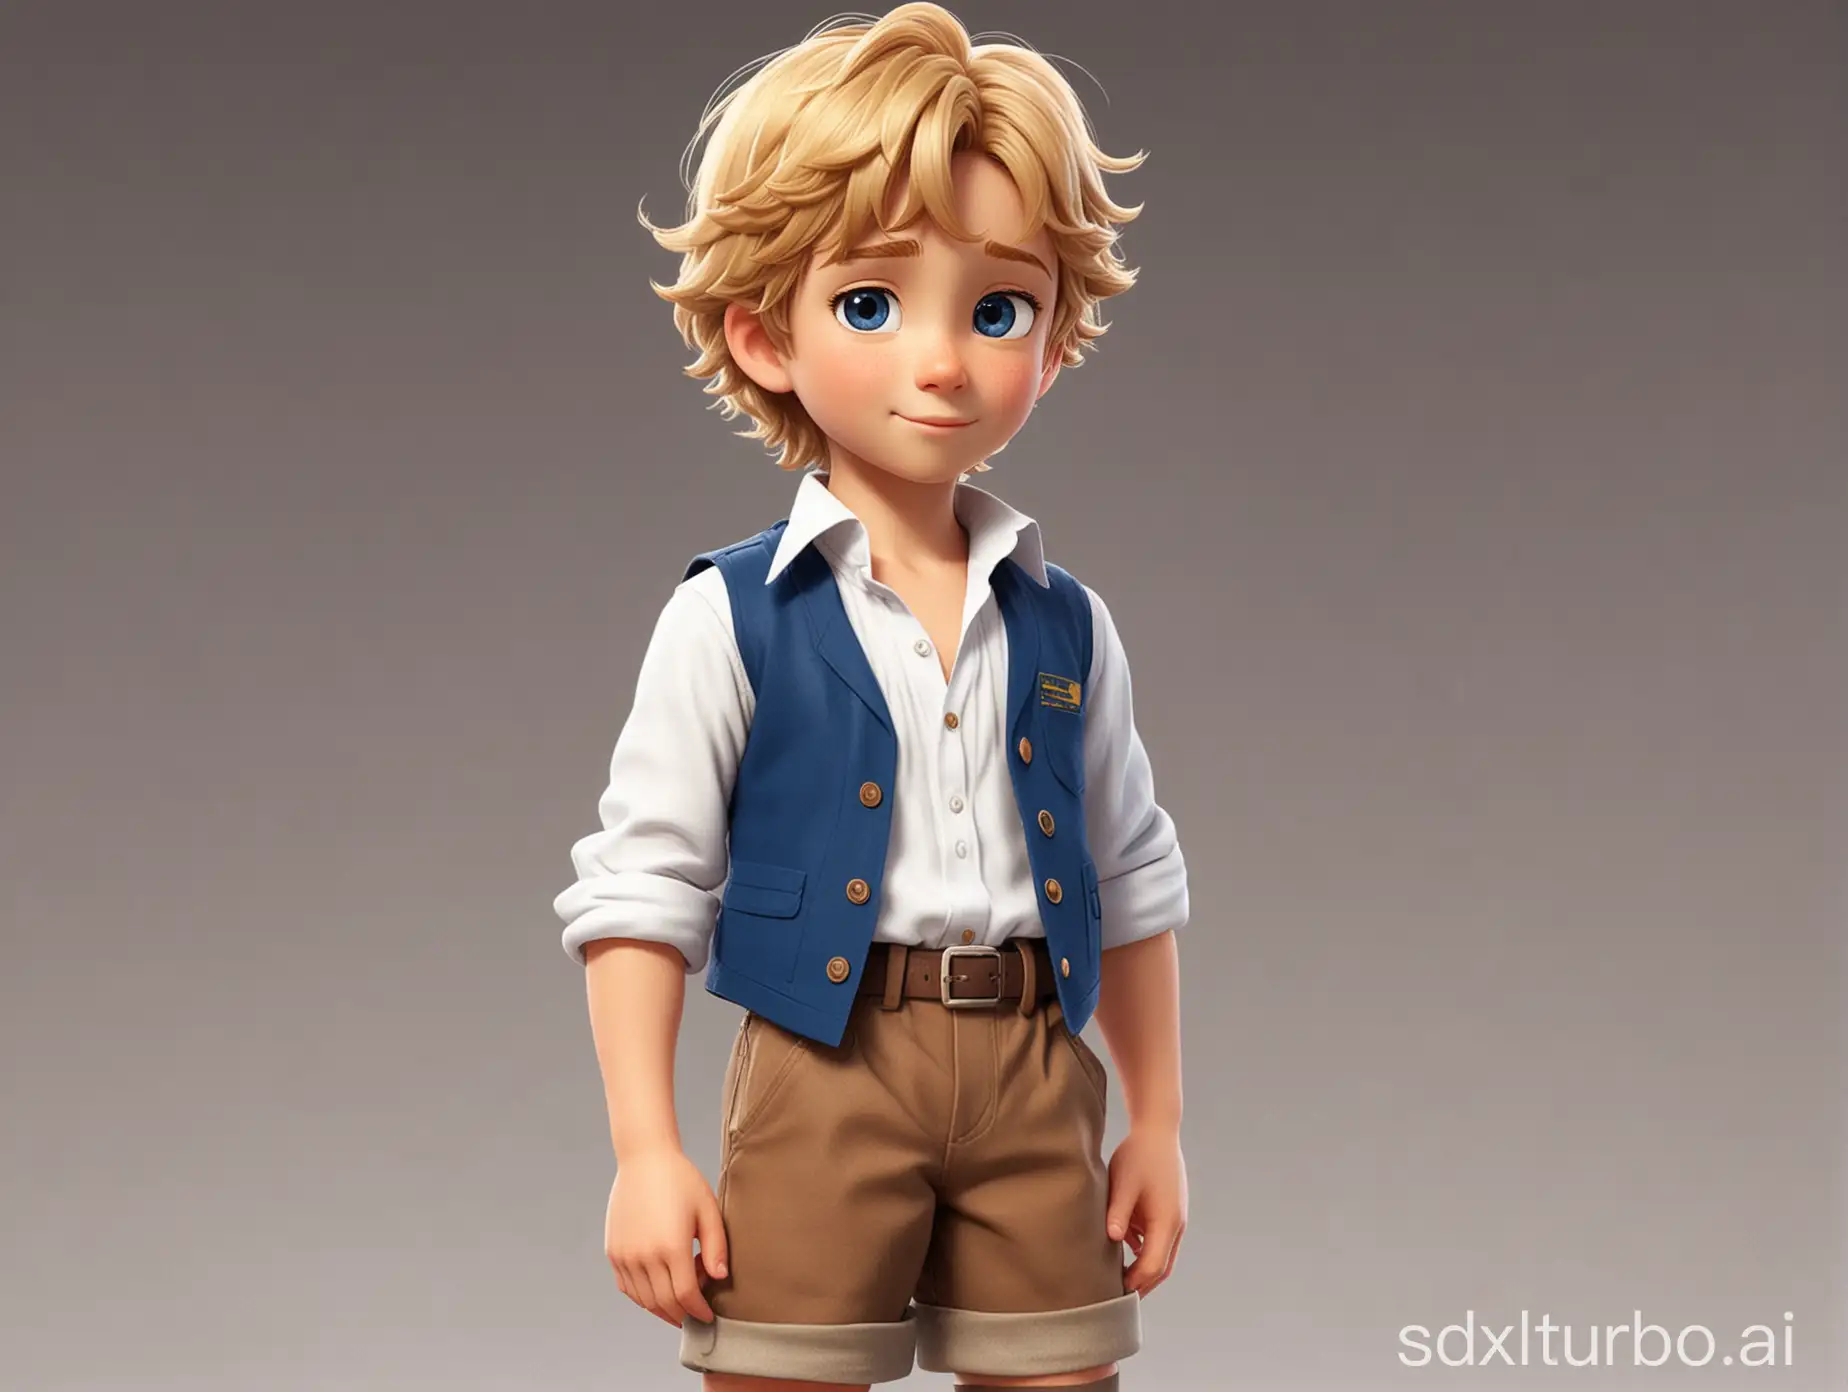 Disney-AnimeStyle-Little-Boy-with-Blonde-Curly-Hair-in-White-Shirt-and-Blue-Waistcoat